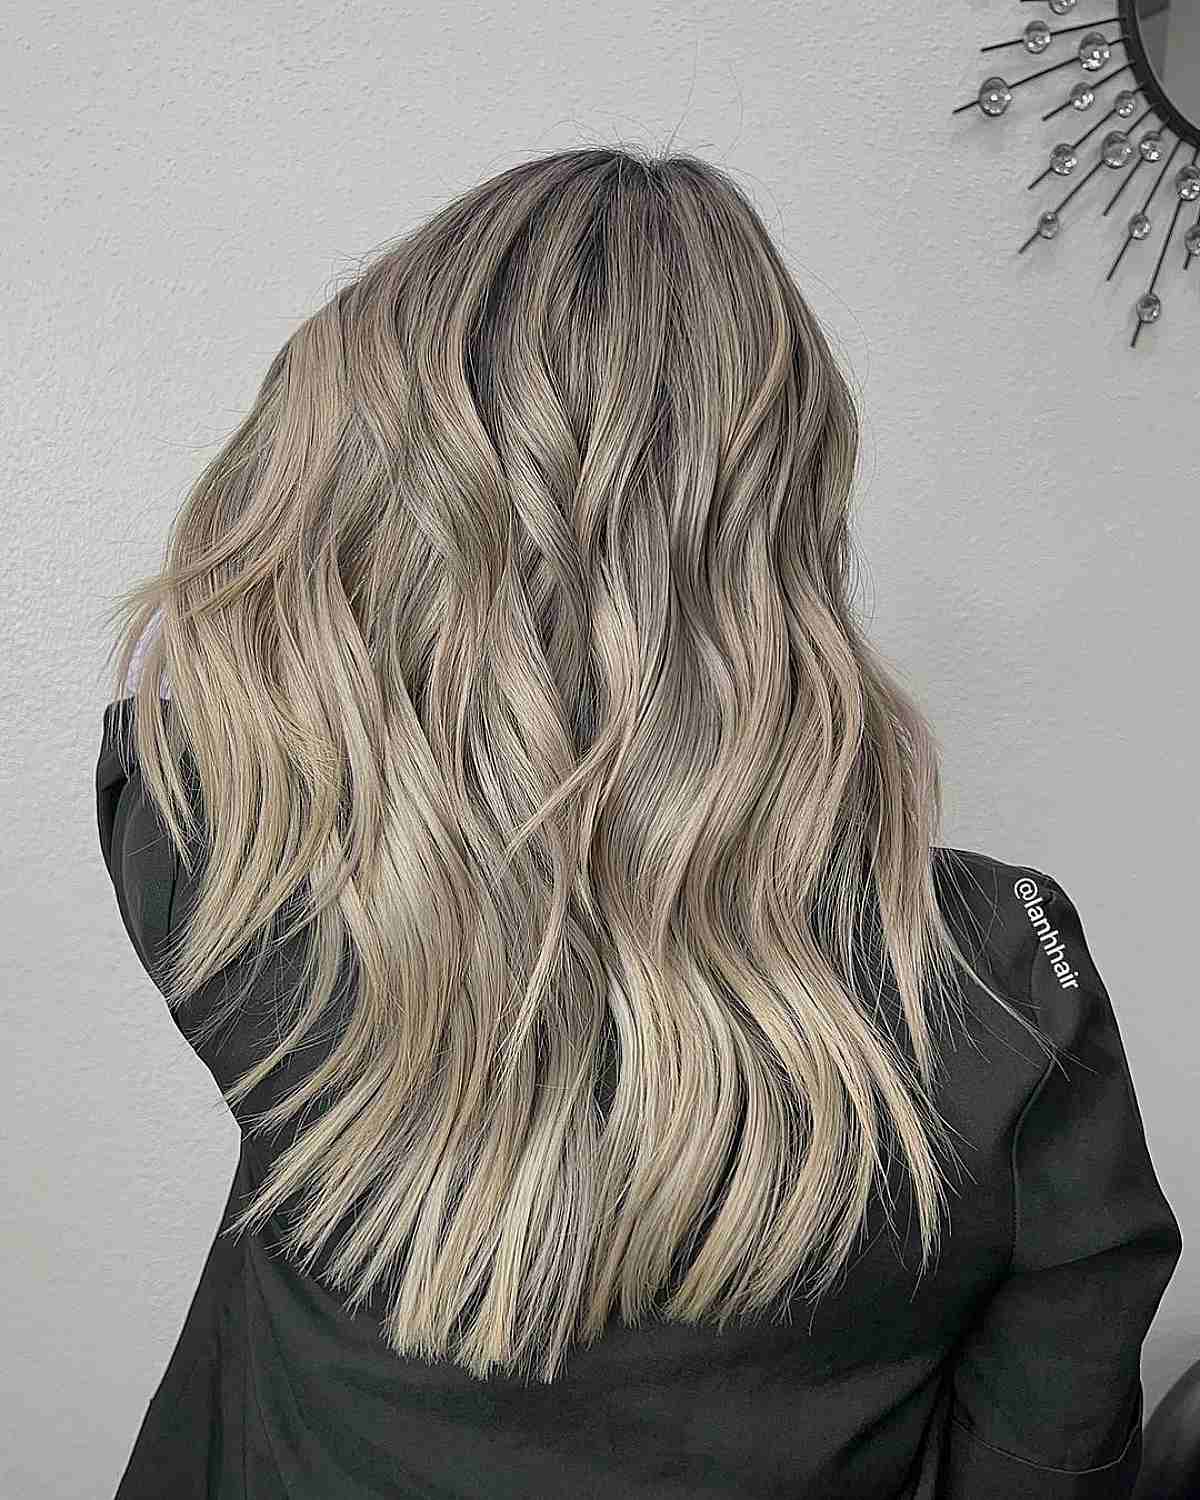 42 Types Of Ash Blonde Hair Colors & Trendy Ways To Get It